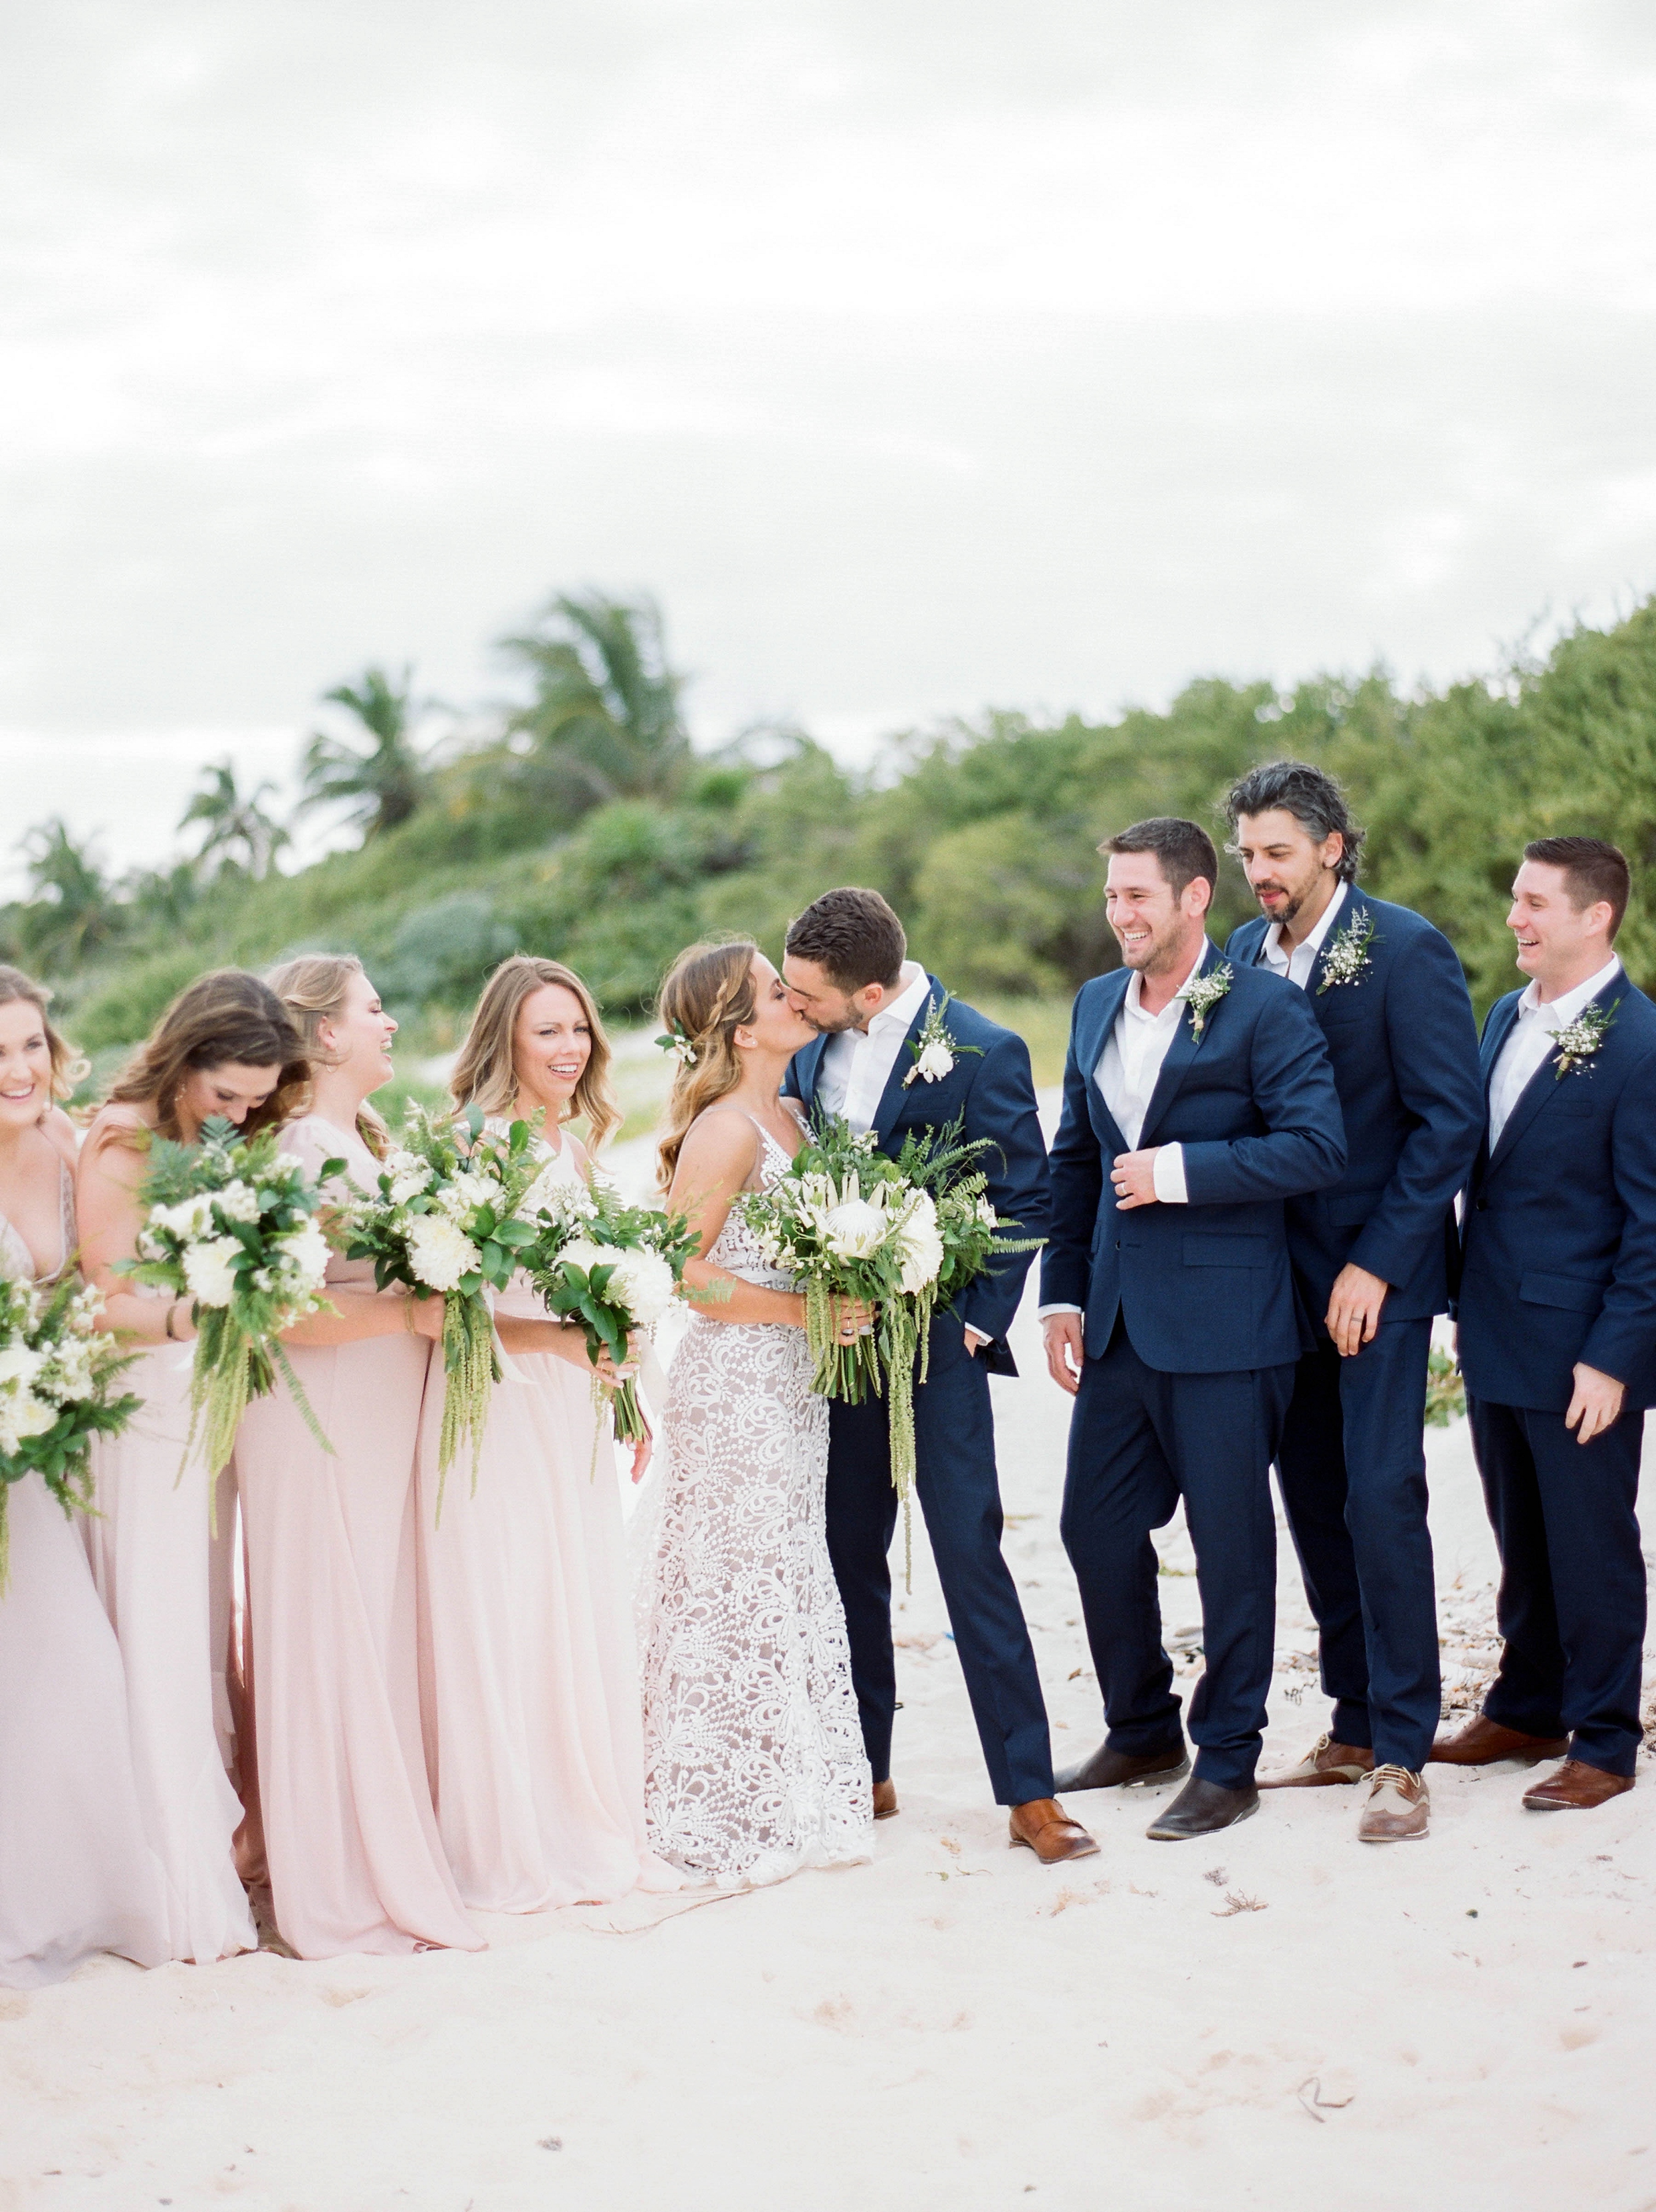 A Mexico Destination Wedding in Playa Del Carmen | Carrie House Photography